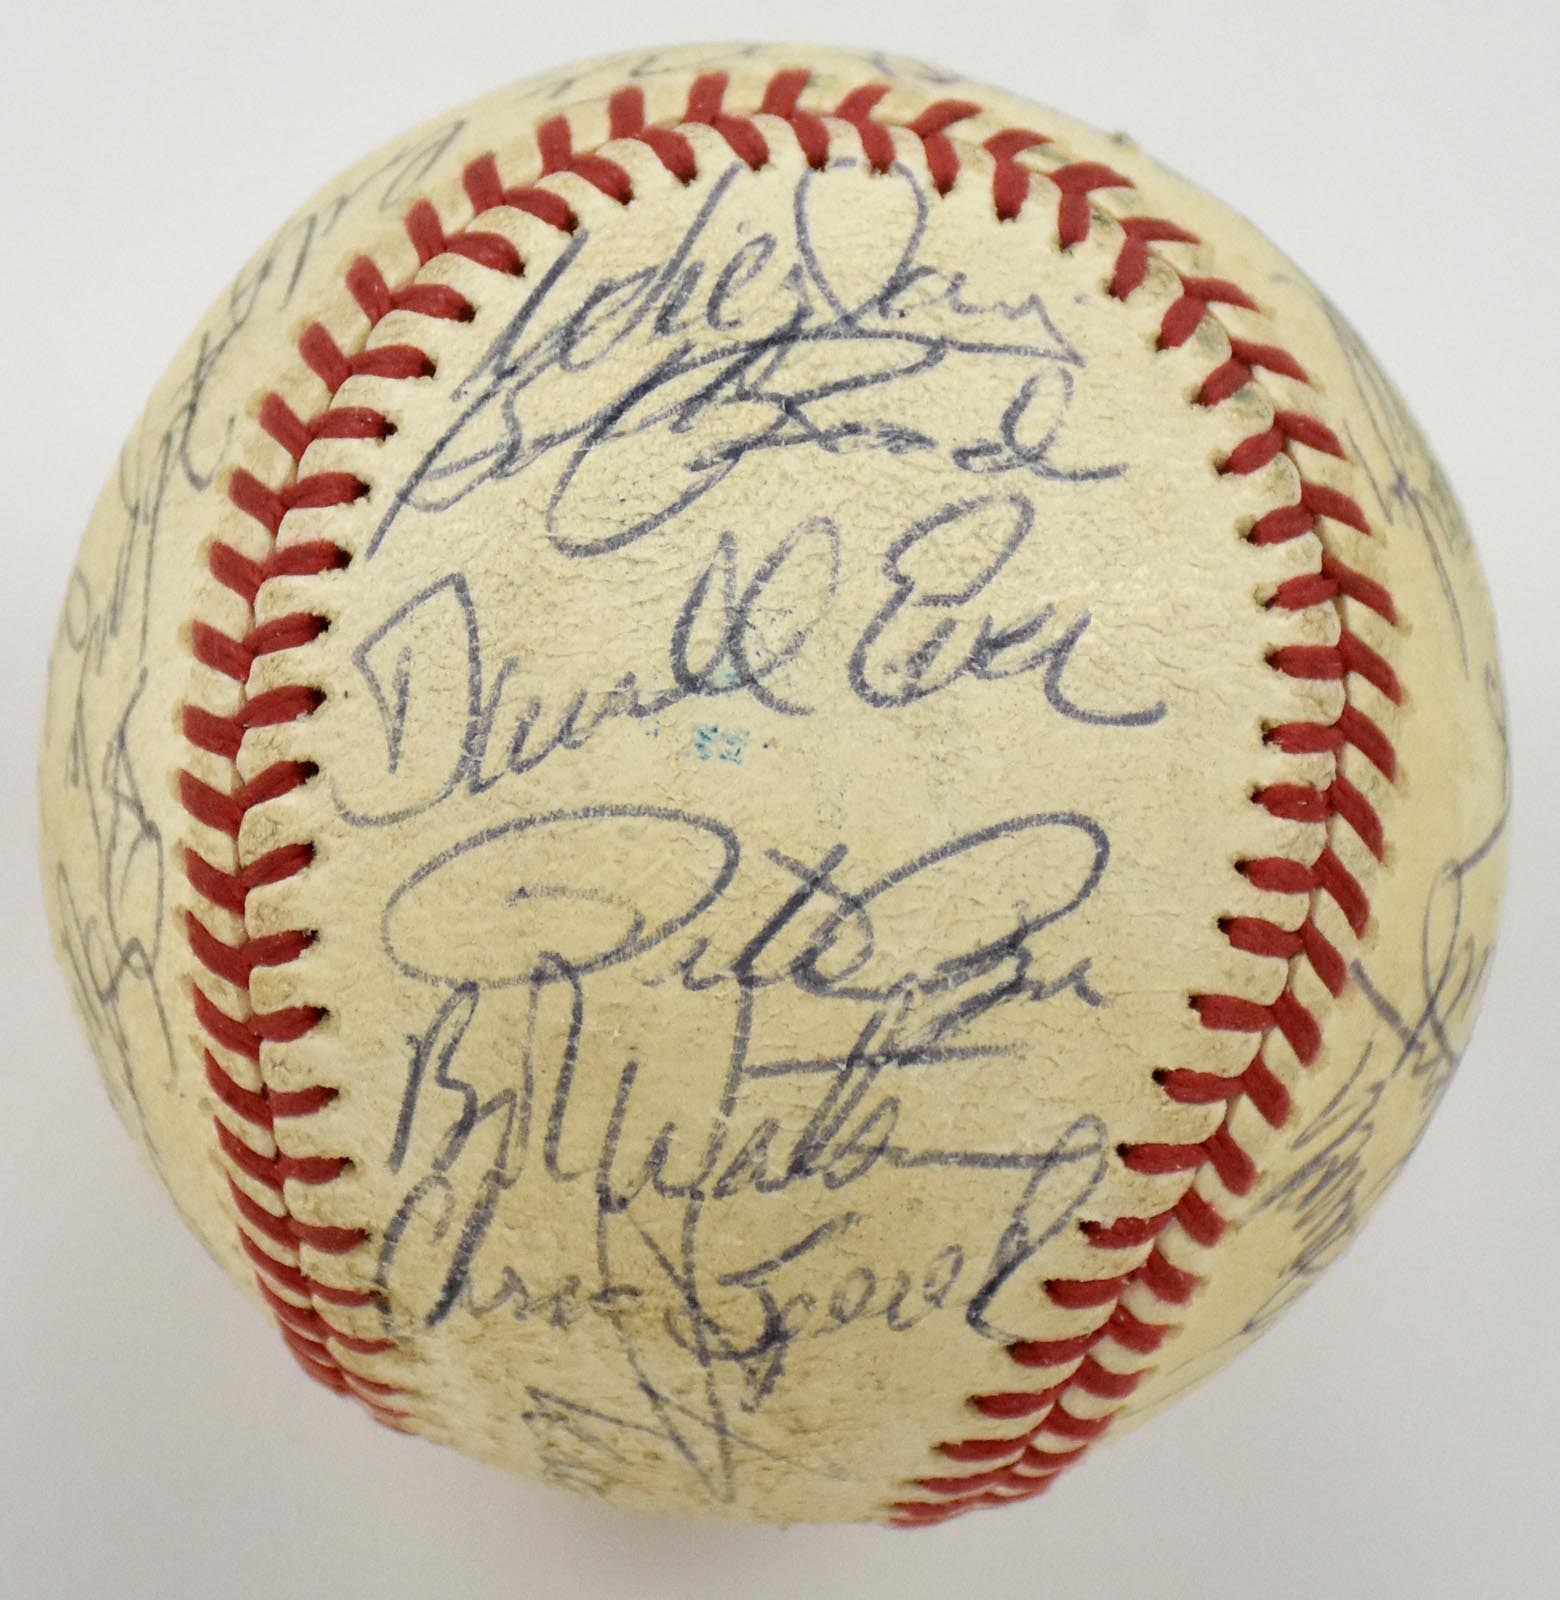 - 1973 National League All Star Game Signed Baseball